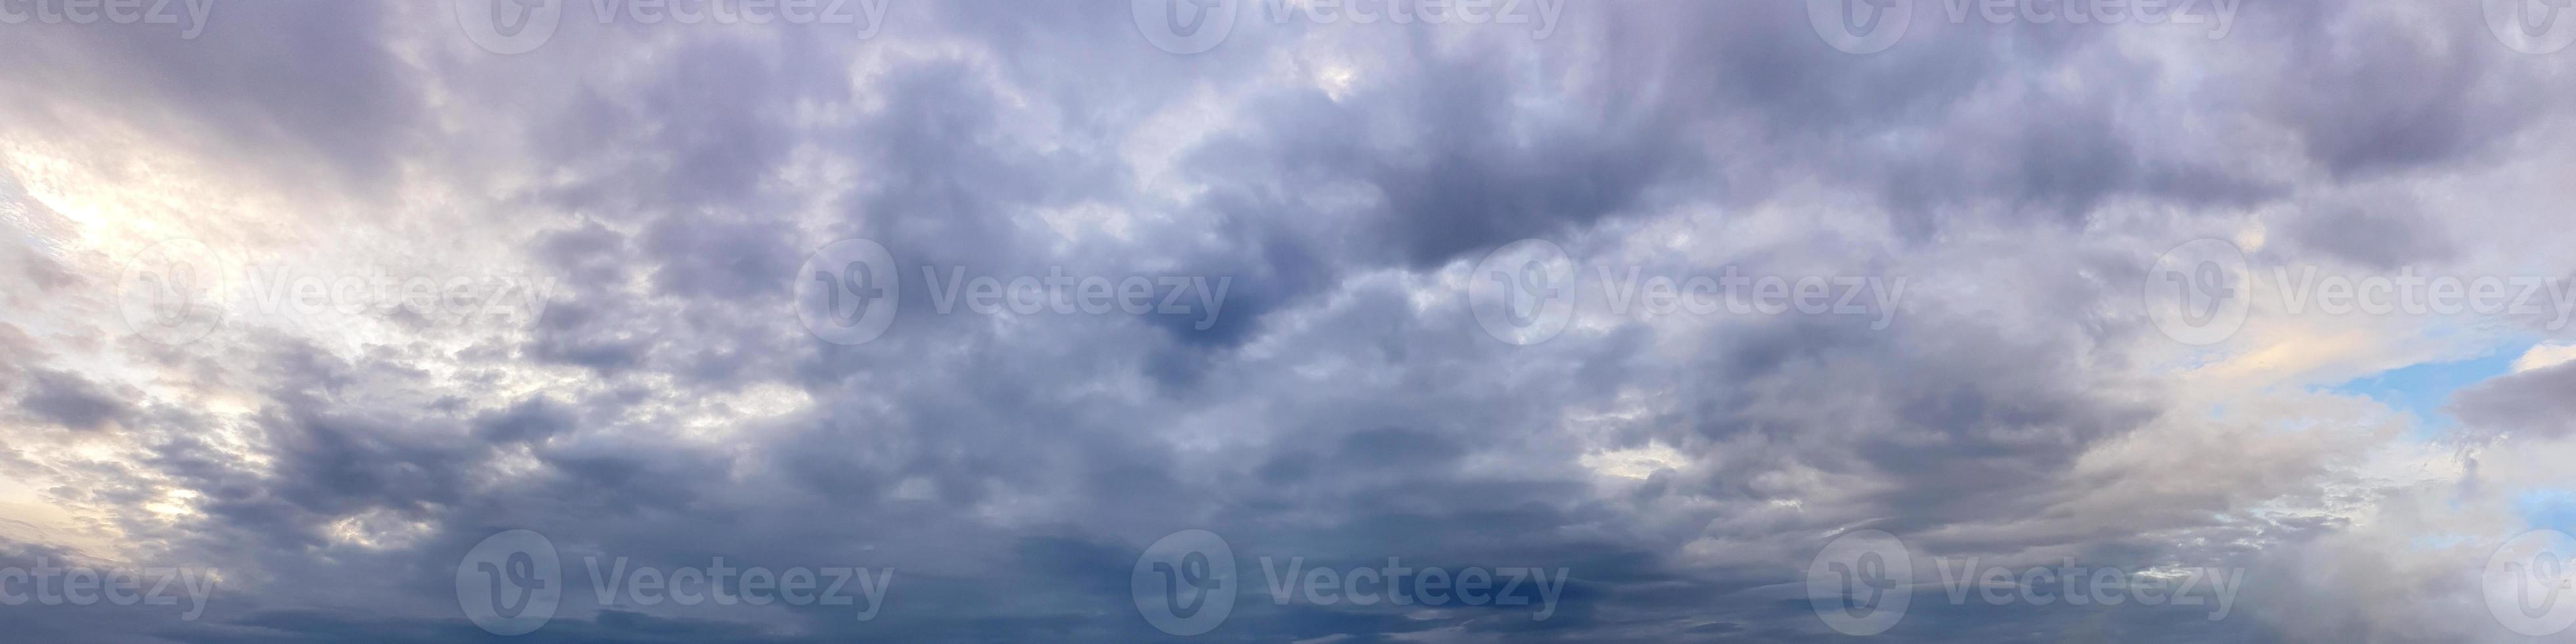 Dramatic panorama sky with storm cloud on a cloudy day photo